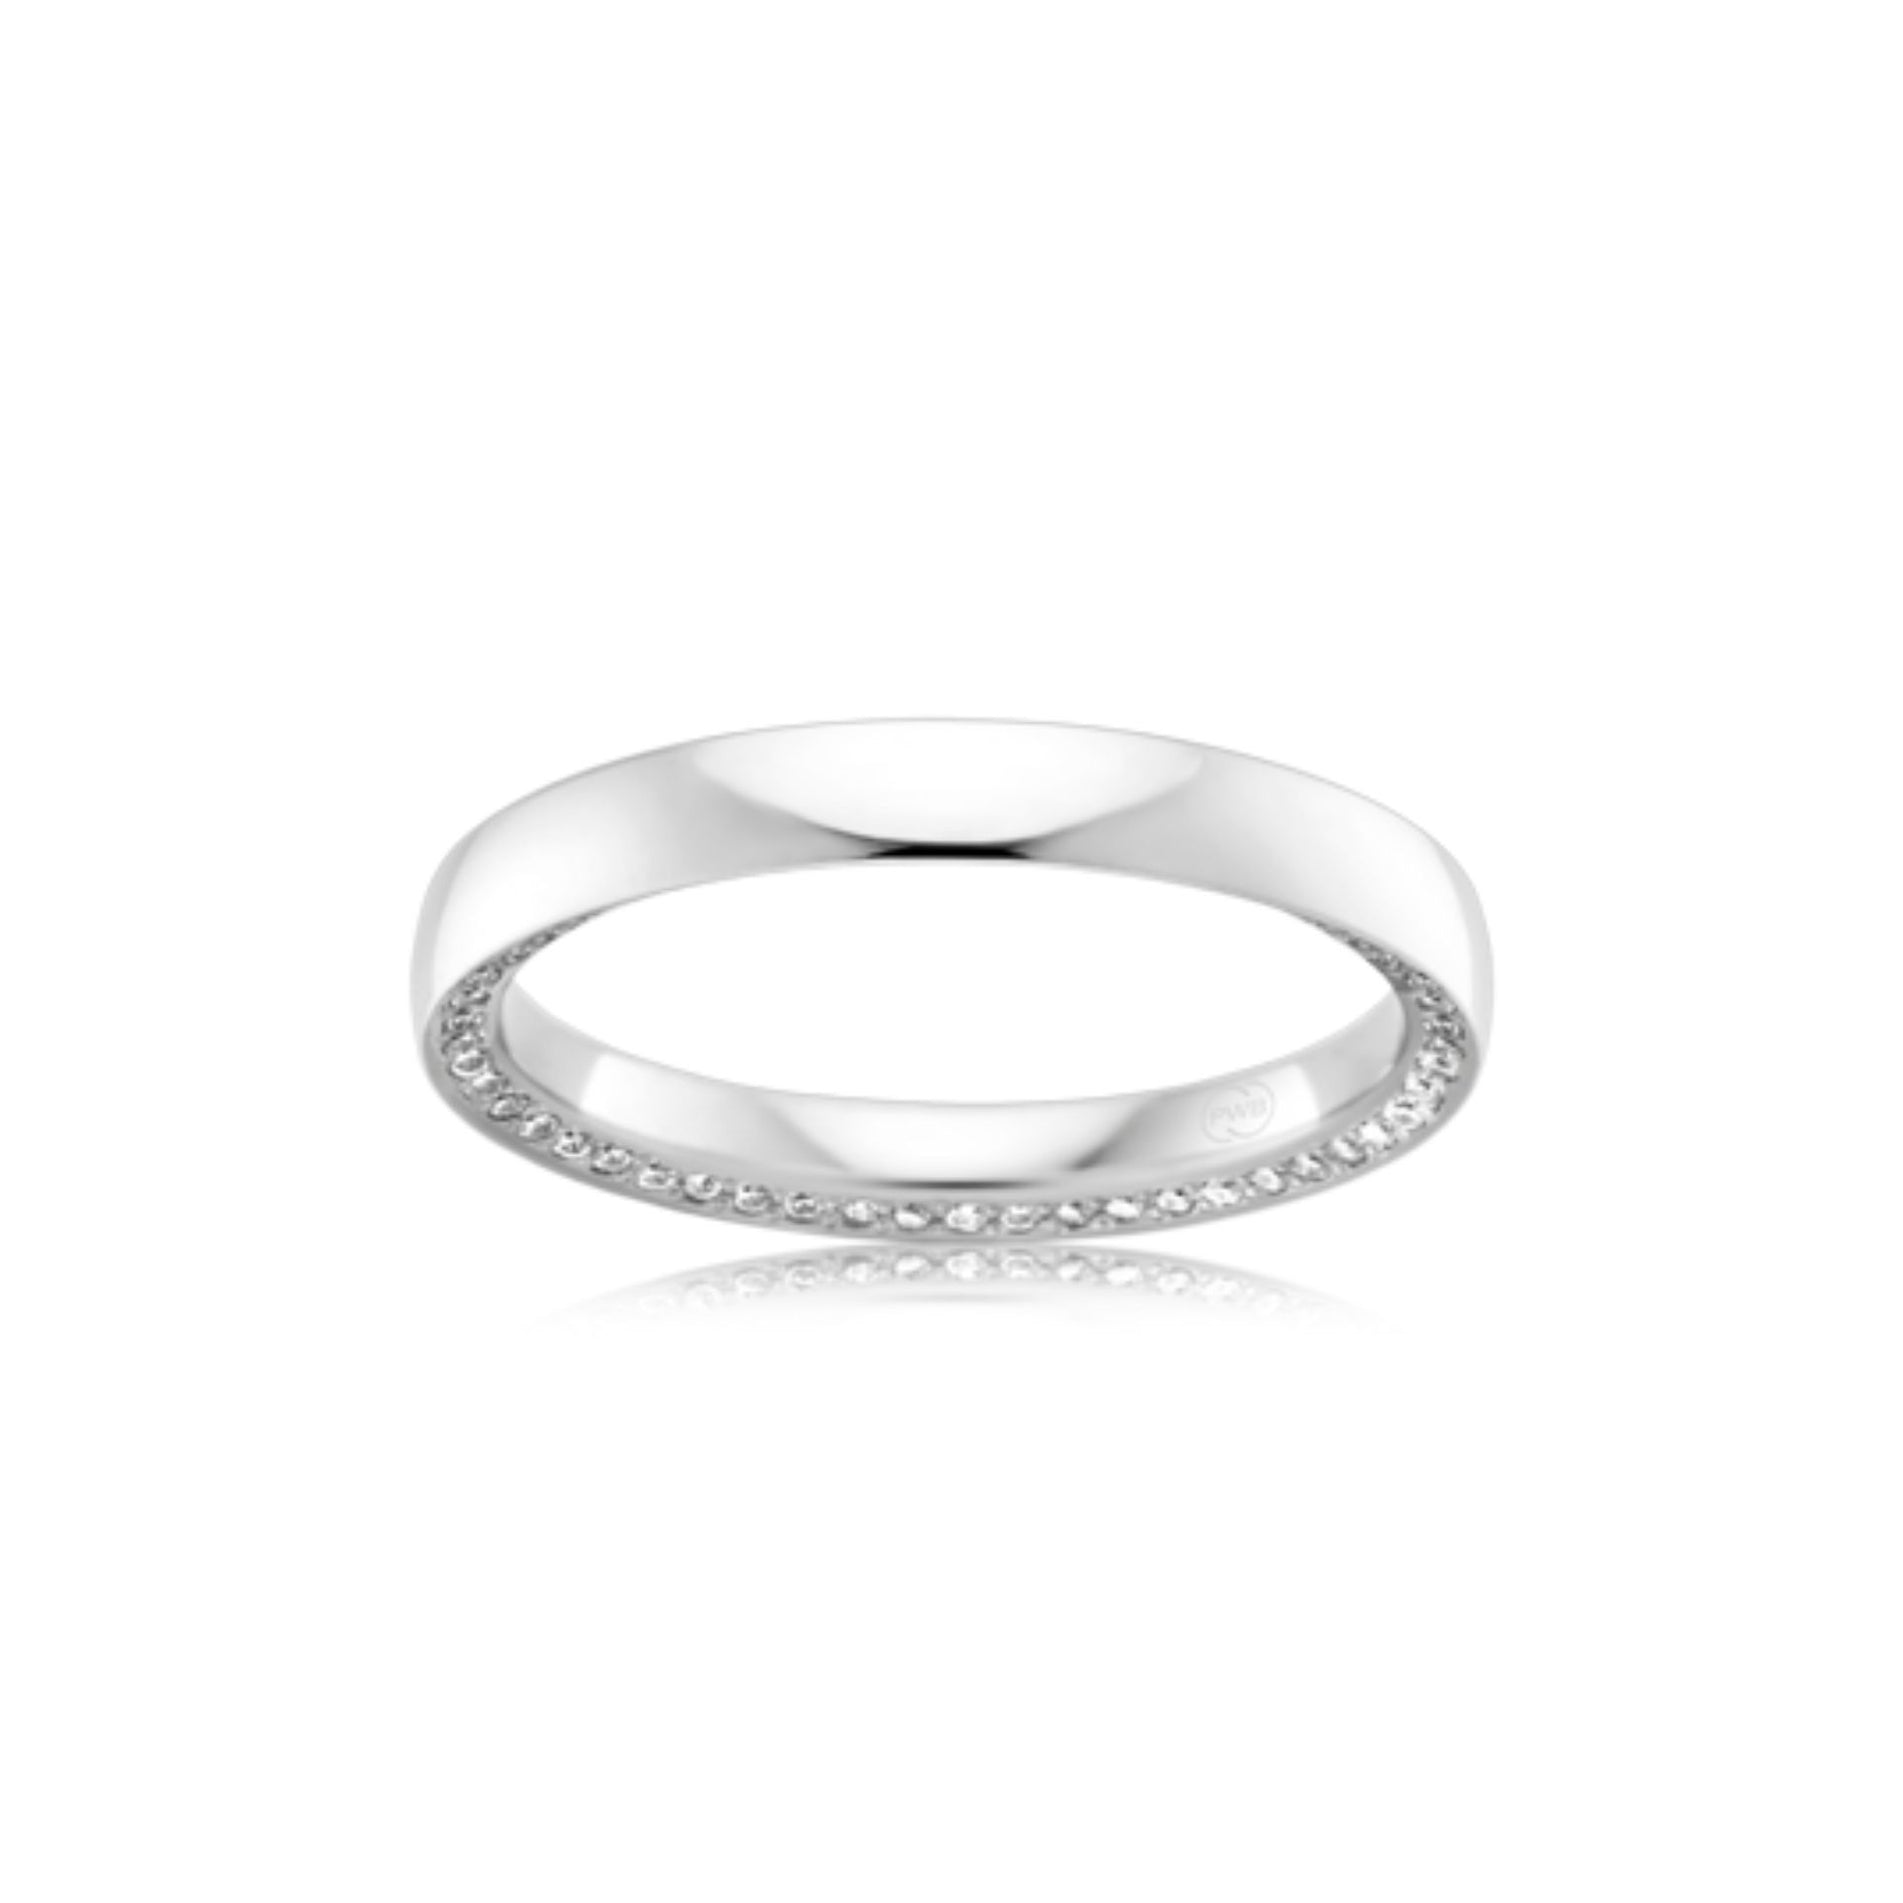 Orion Diamond and White Gold Eternity Ring - Orsini Jewellers